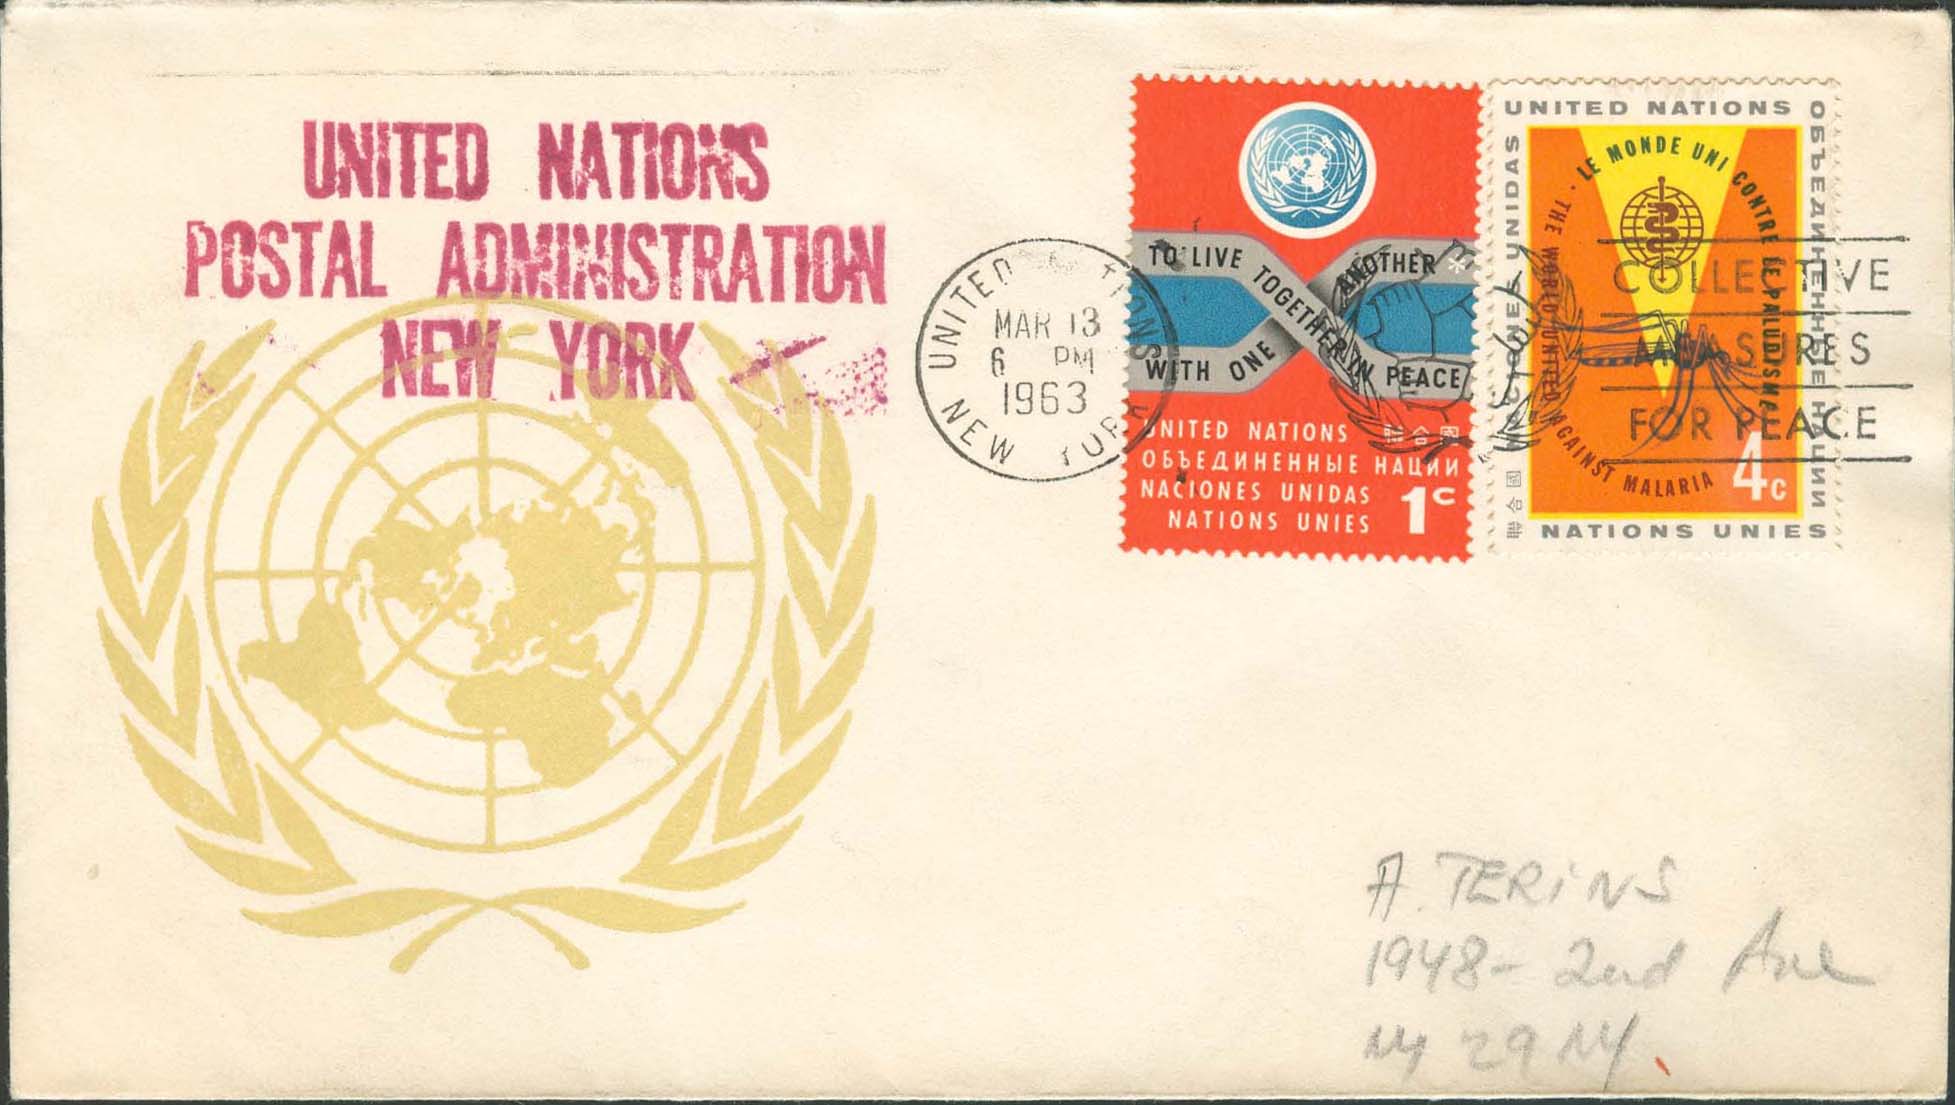 Scott 102 2nd print - March 13, 1963 <br />Machine slogan "Collective measures for peace"<br />UN Postal Administration rubber stamped return address